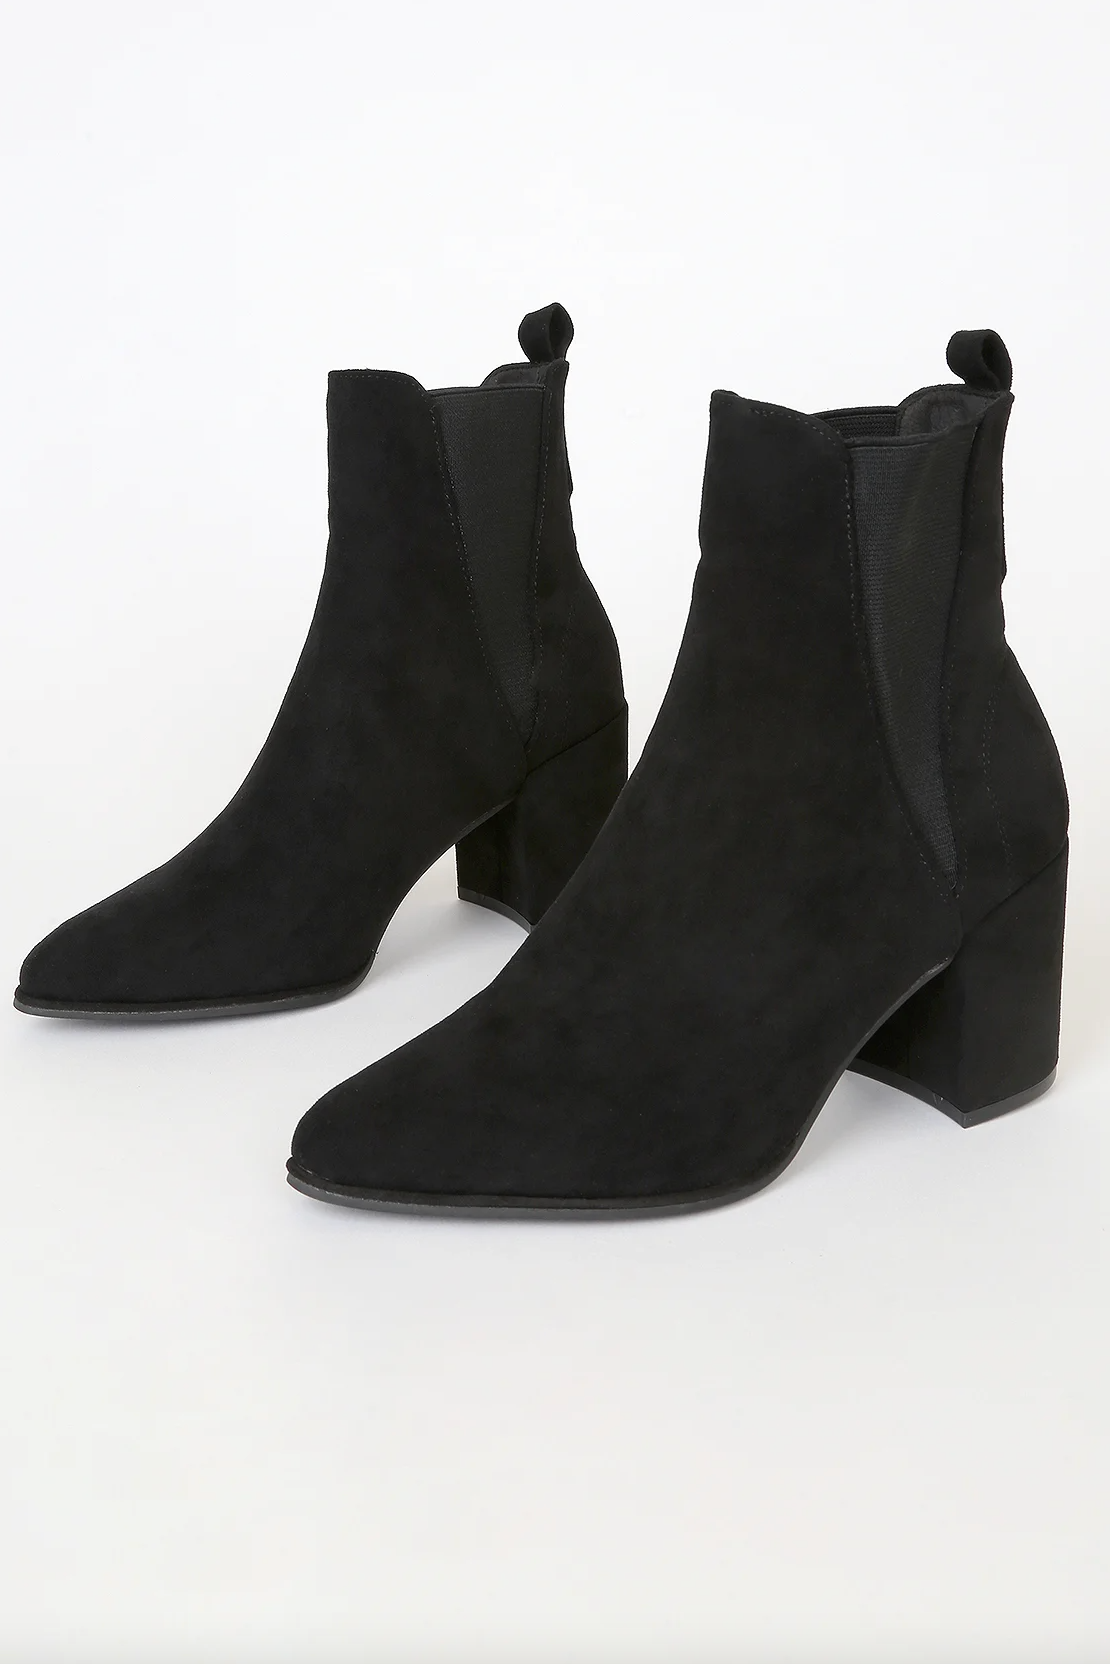 Lulus Zandra Black Suede Pointed Toe Ankle Boots